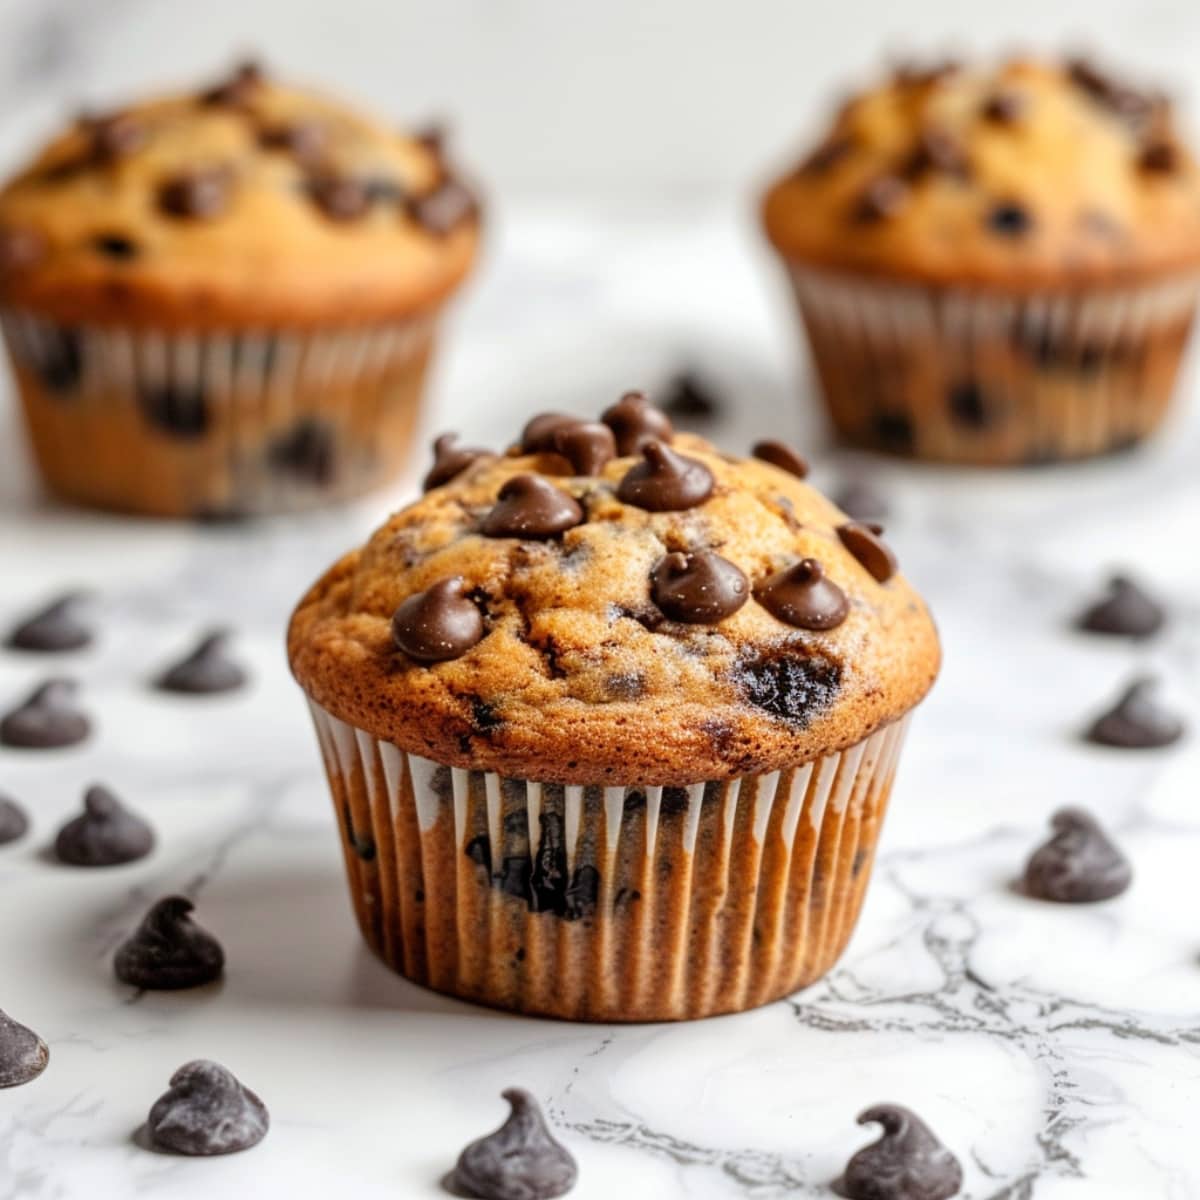 Muffins with kodiak cake mix, chocolate chips and blueberries